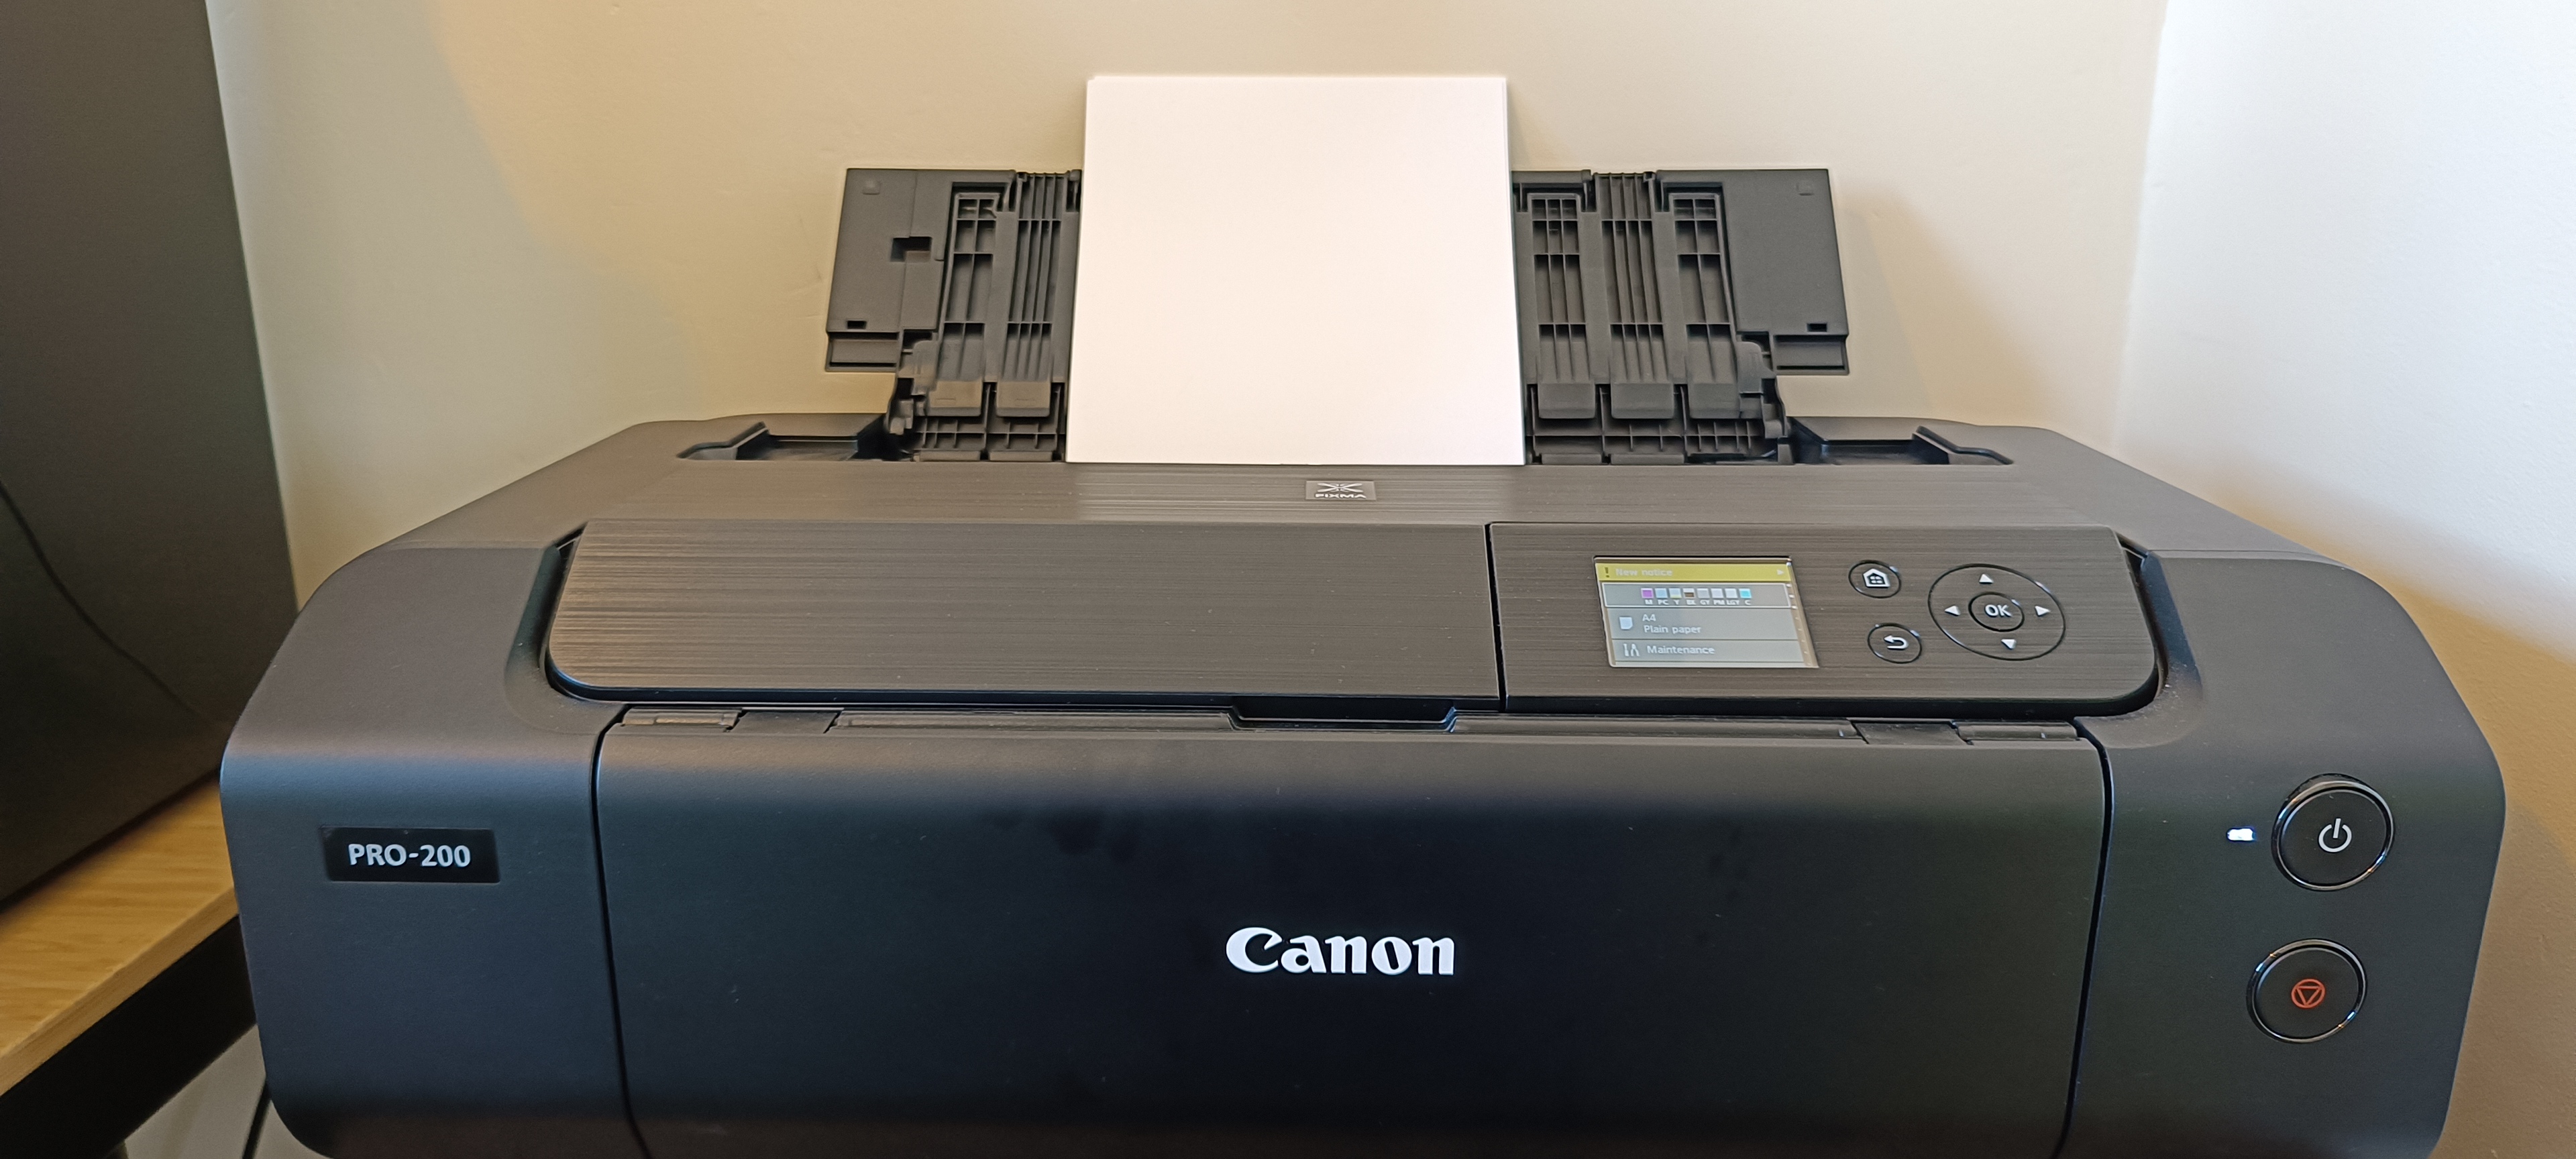 Canon Pixma Pro 200 Review Mighty Printer Produces Great Photos